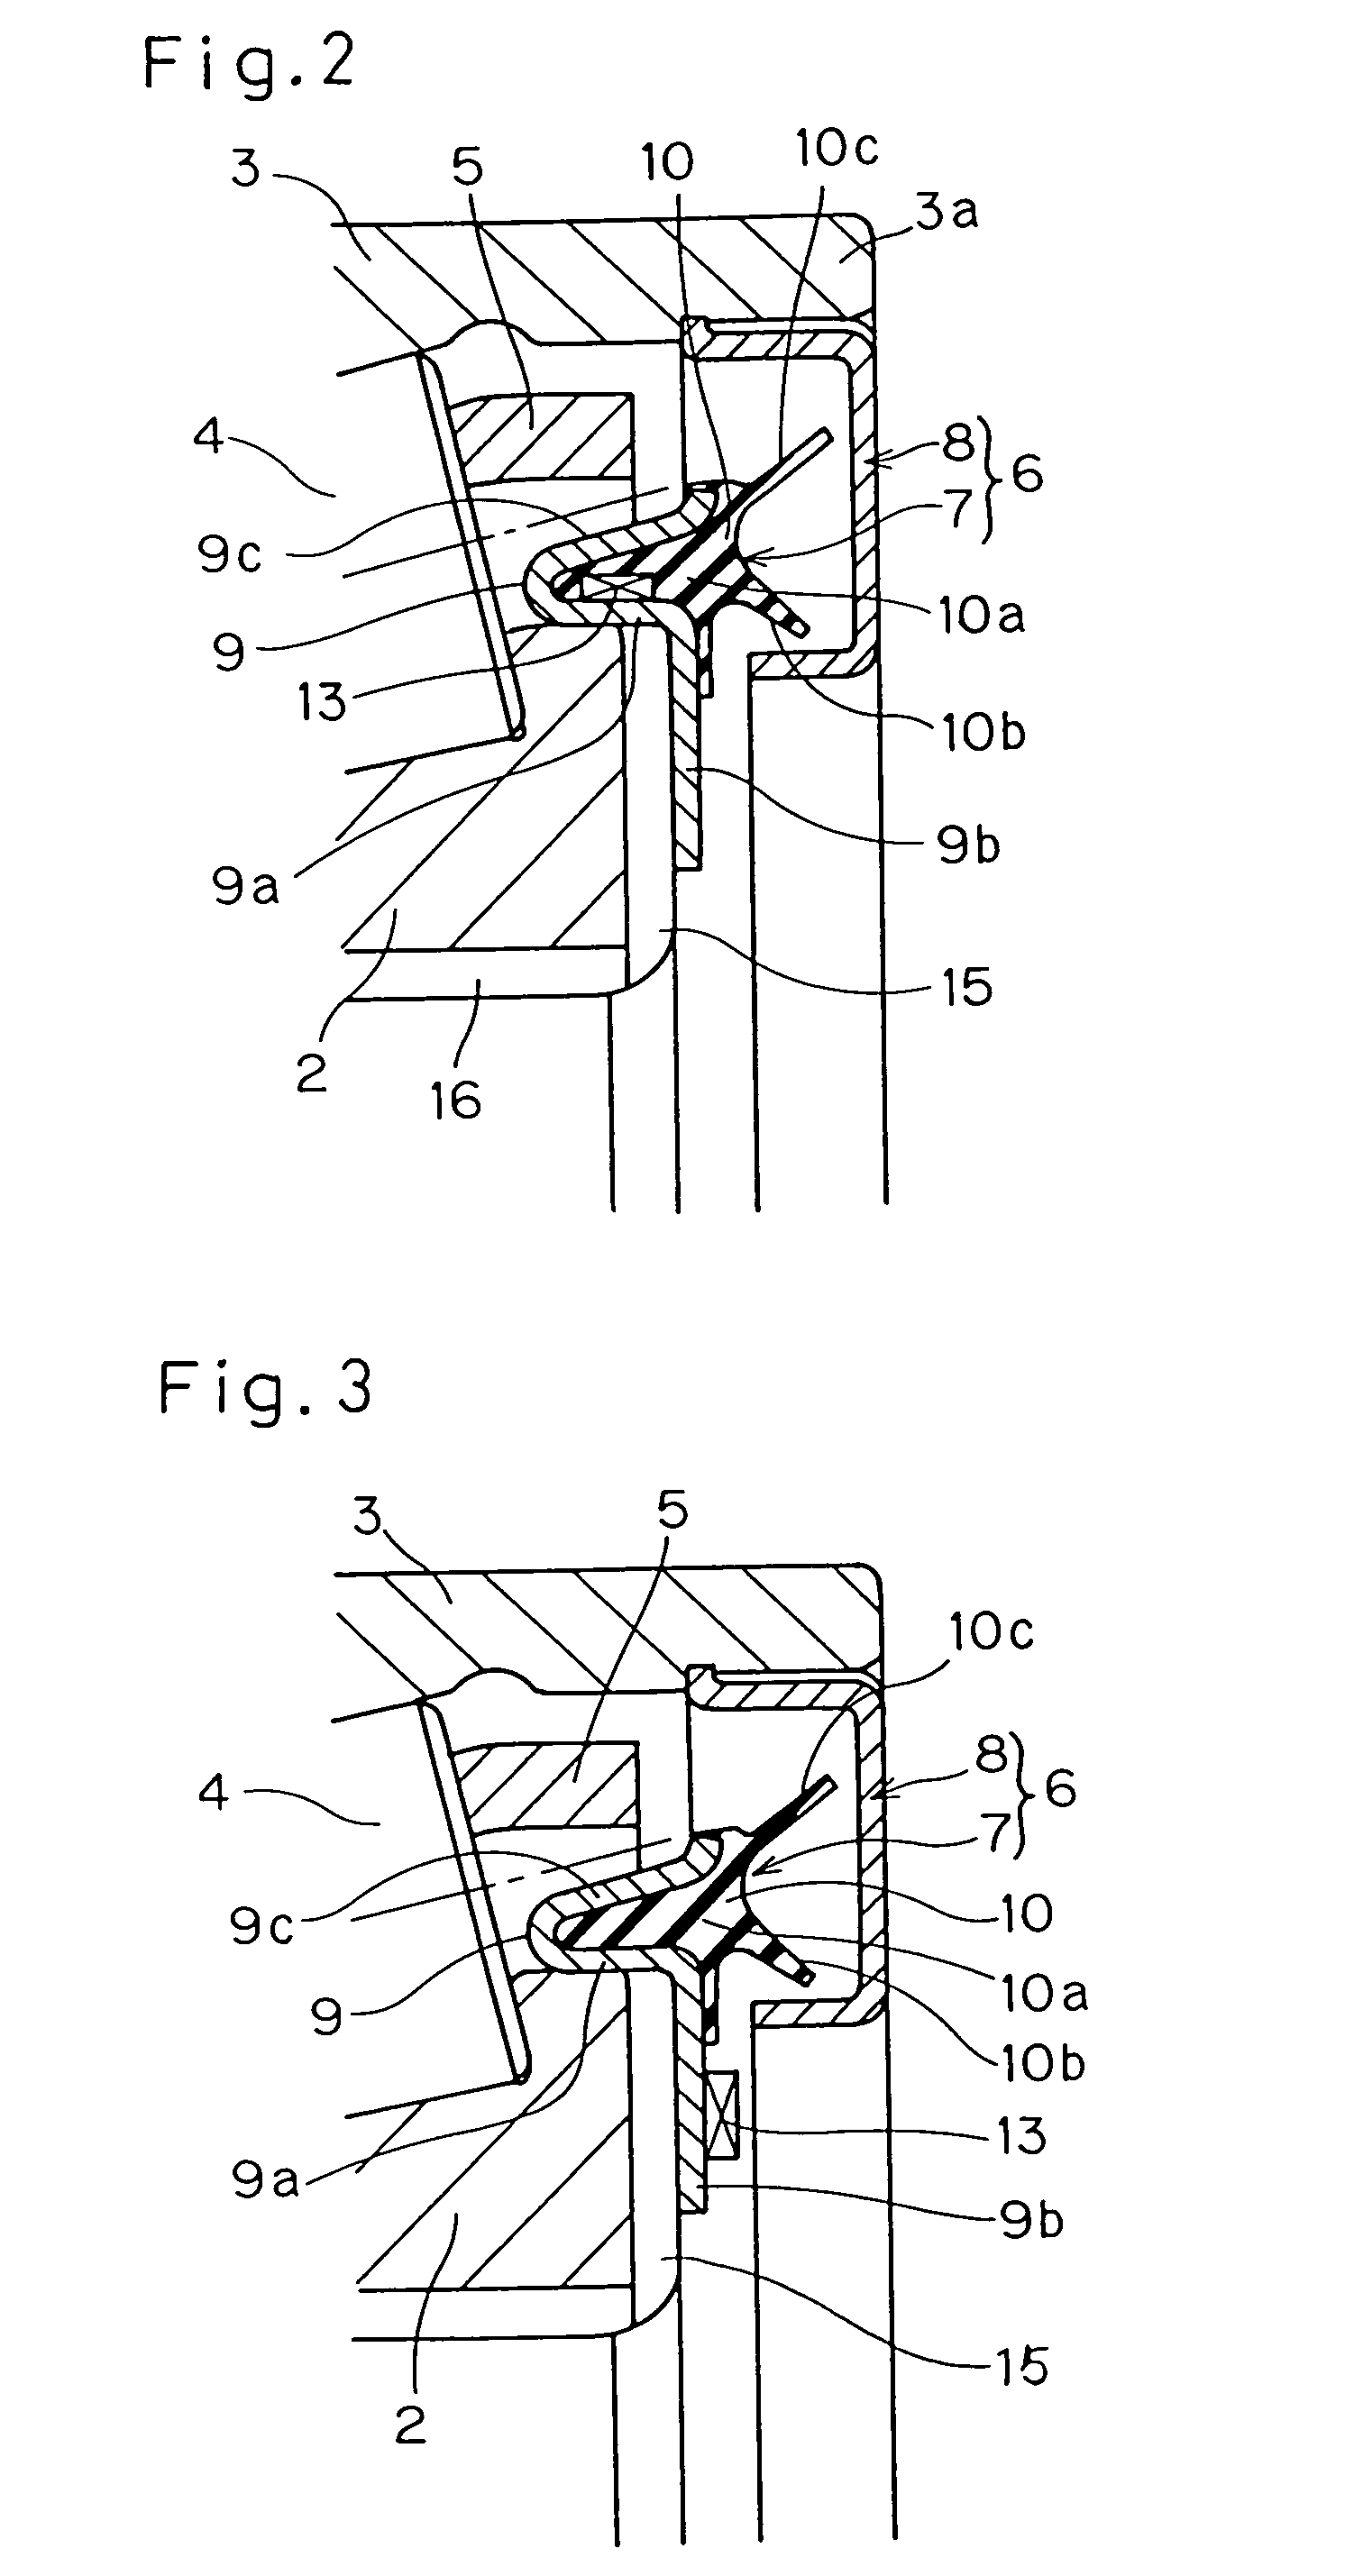 Bearing assembly with temperature sensor